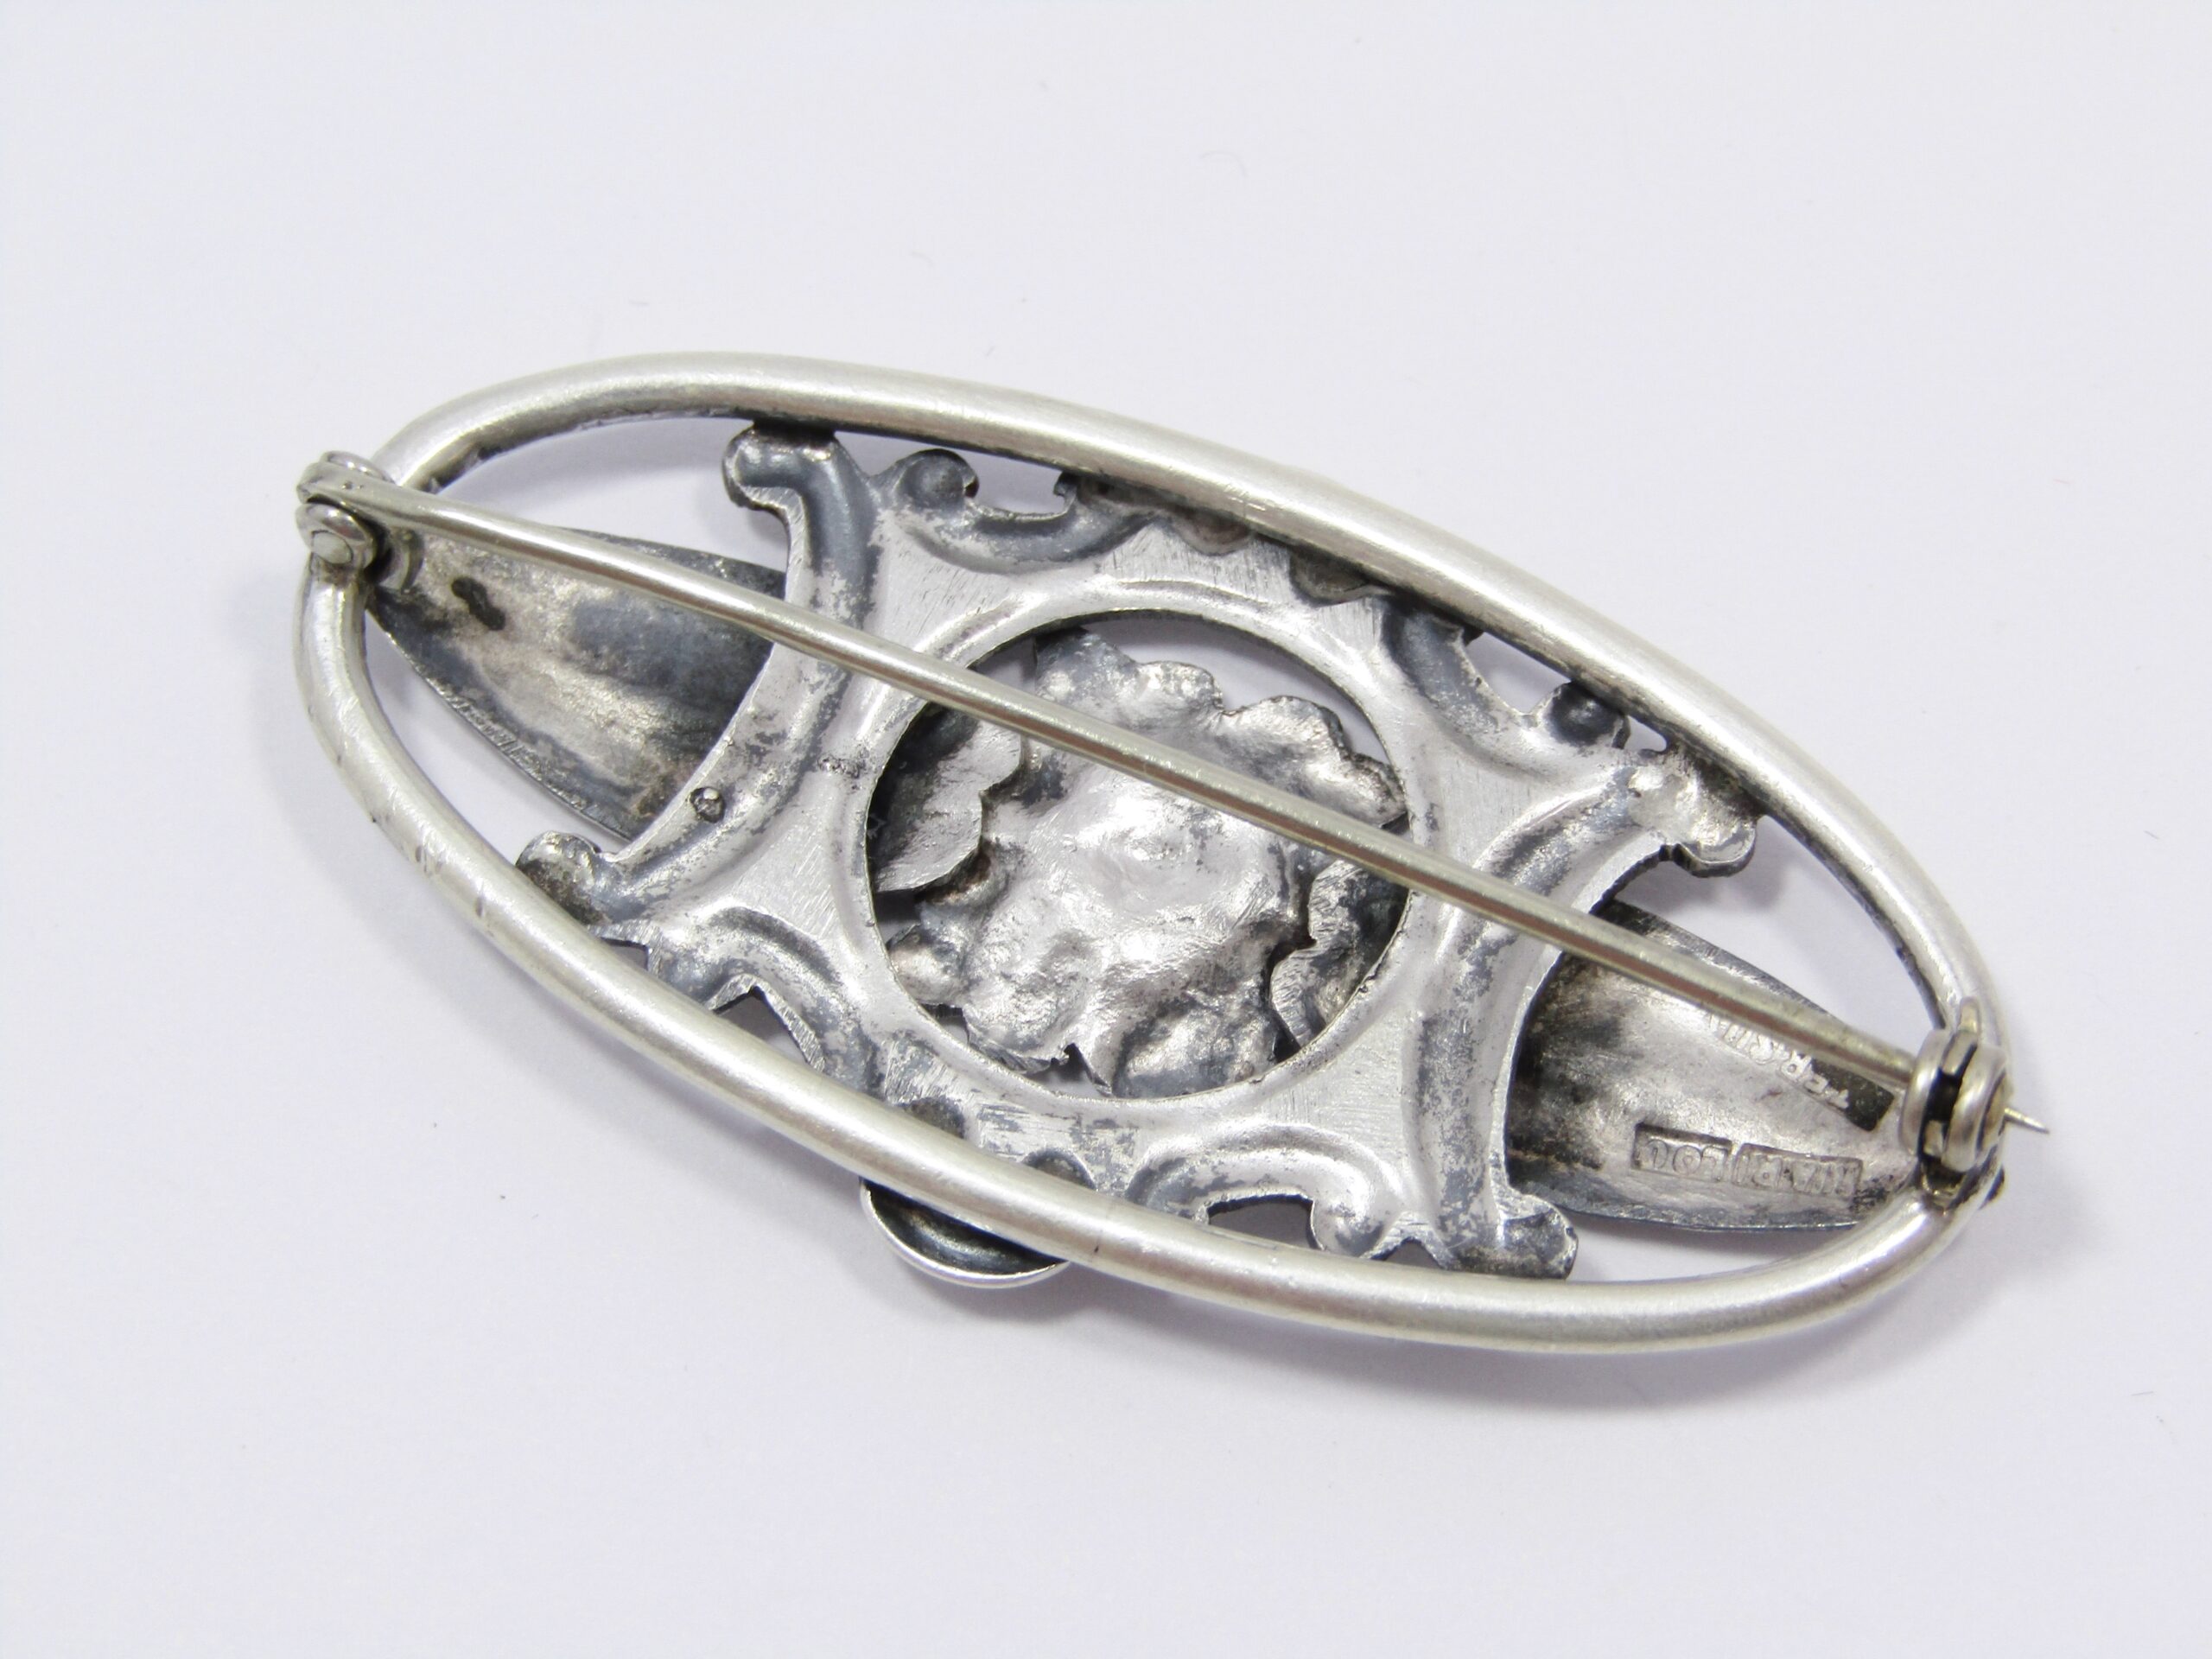 A Stunning Detailed Mari Lou Brooch in Sterling Silver.